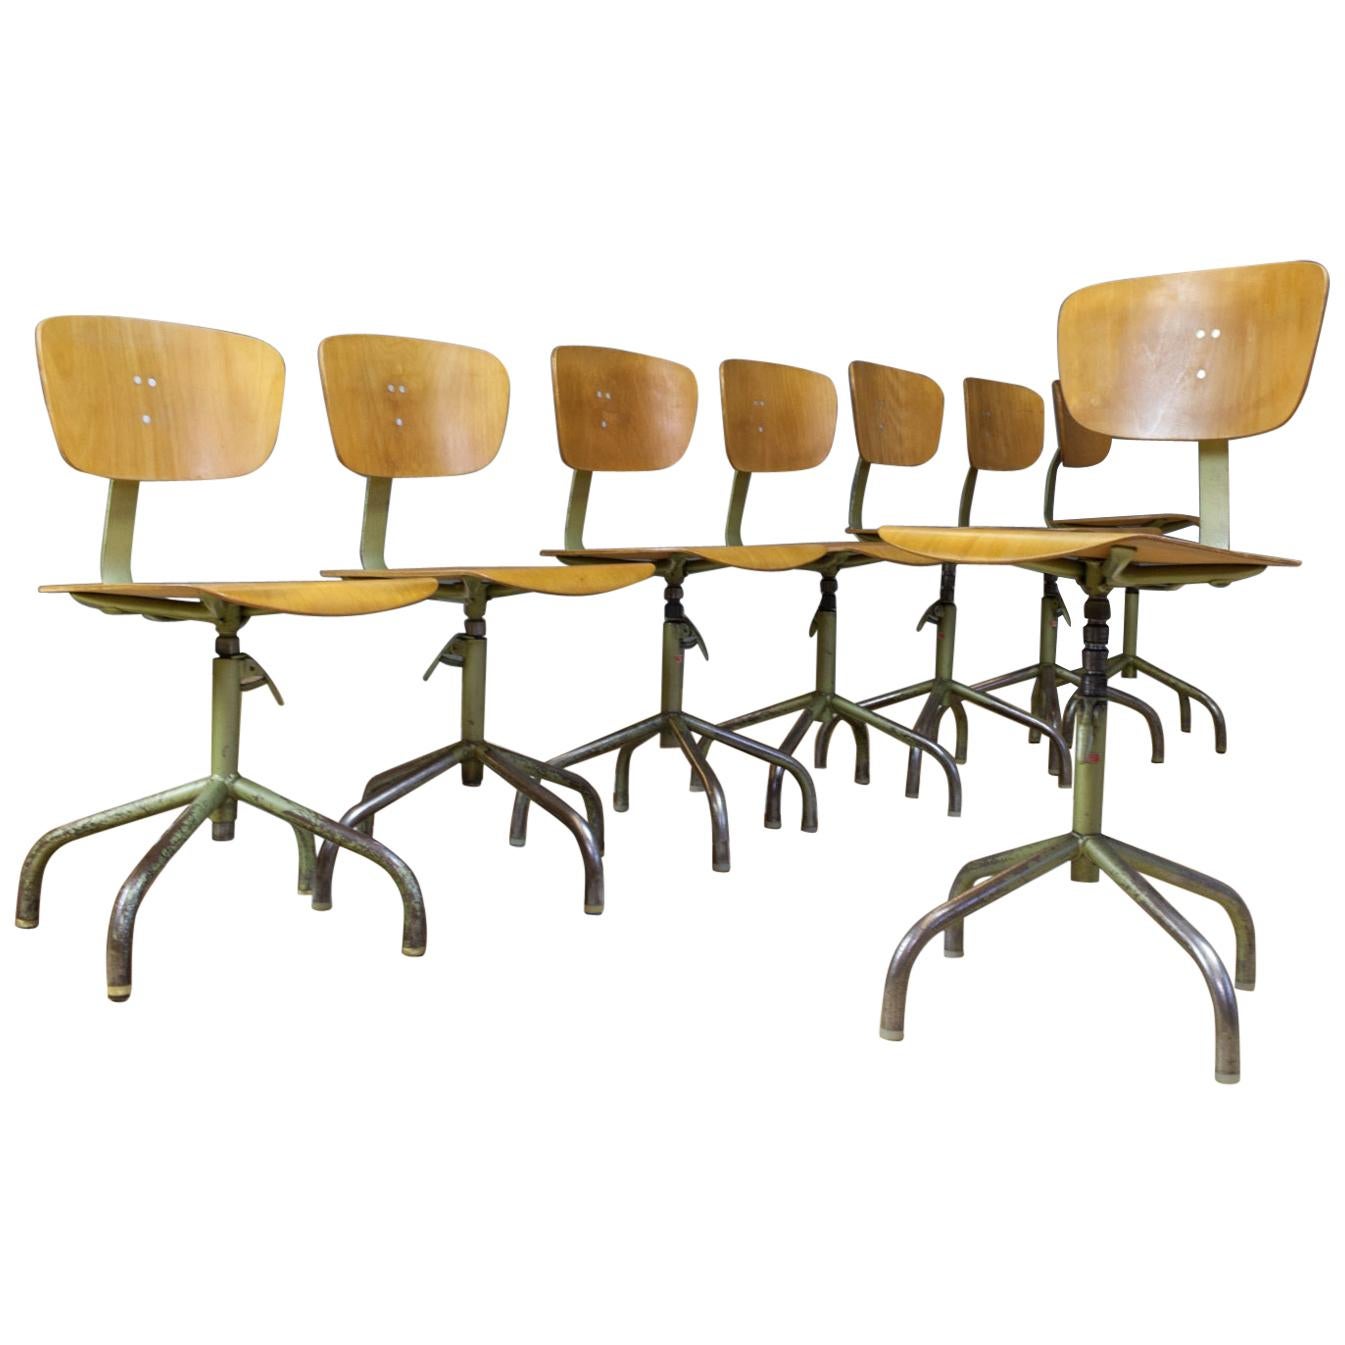 Set of 8 Vintage Desk Swivel Chairs in Metal and Plywood, Germany, 1960s